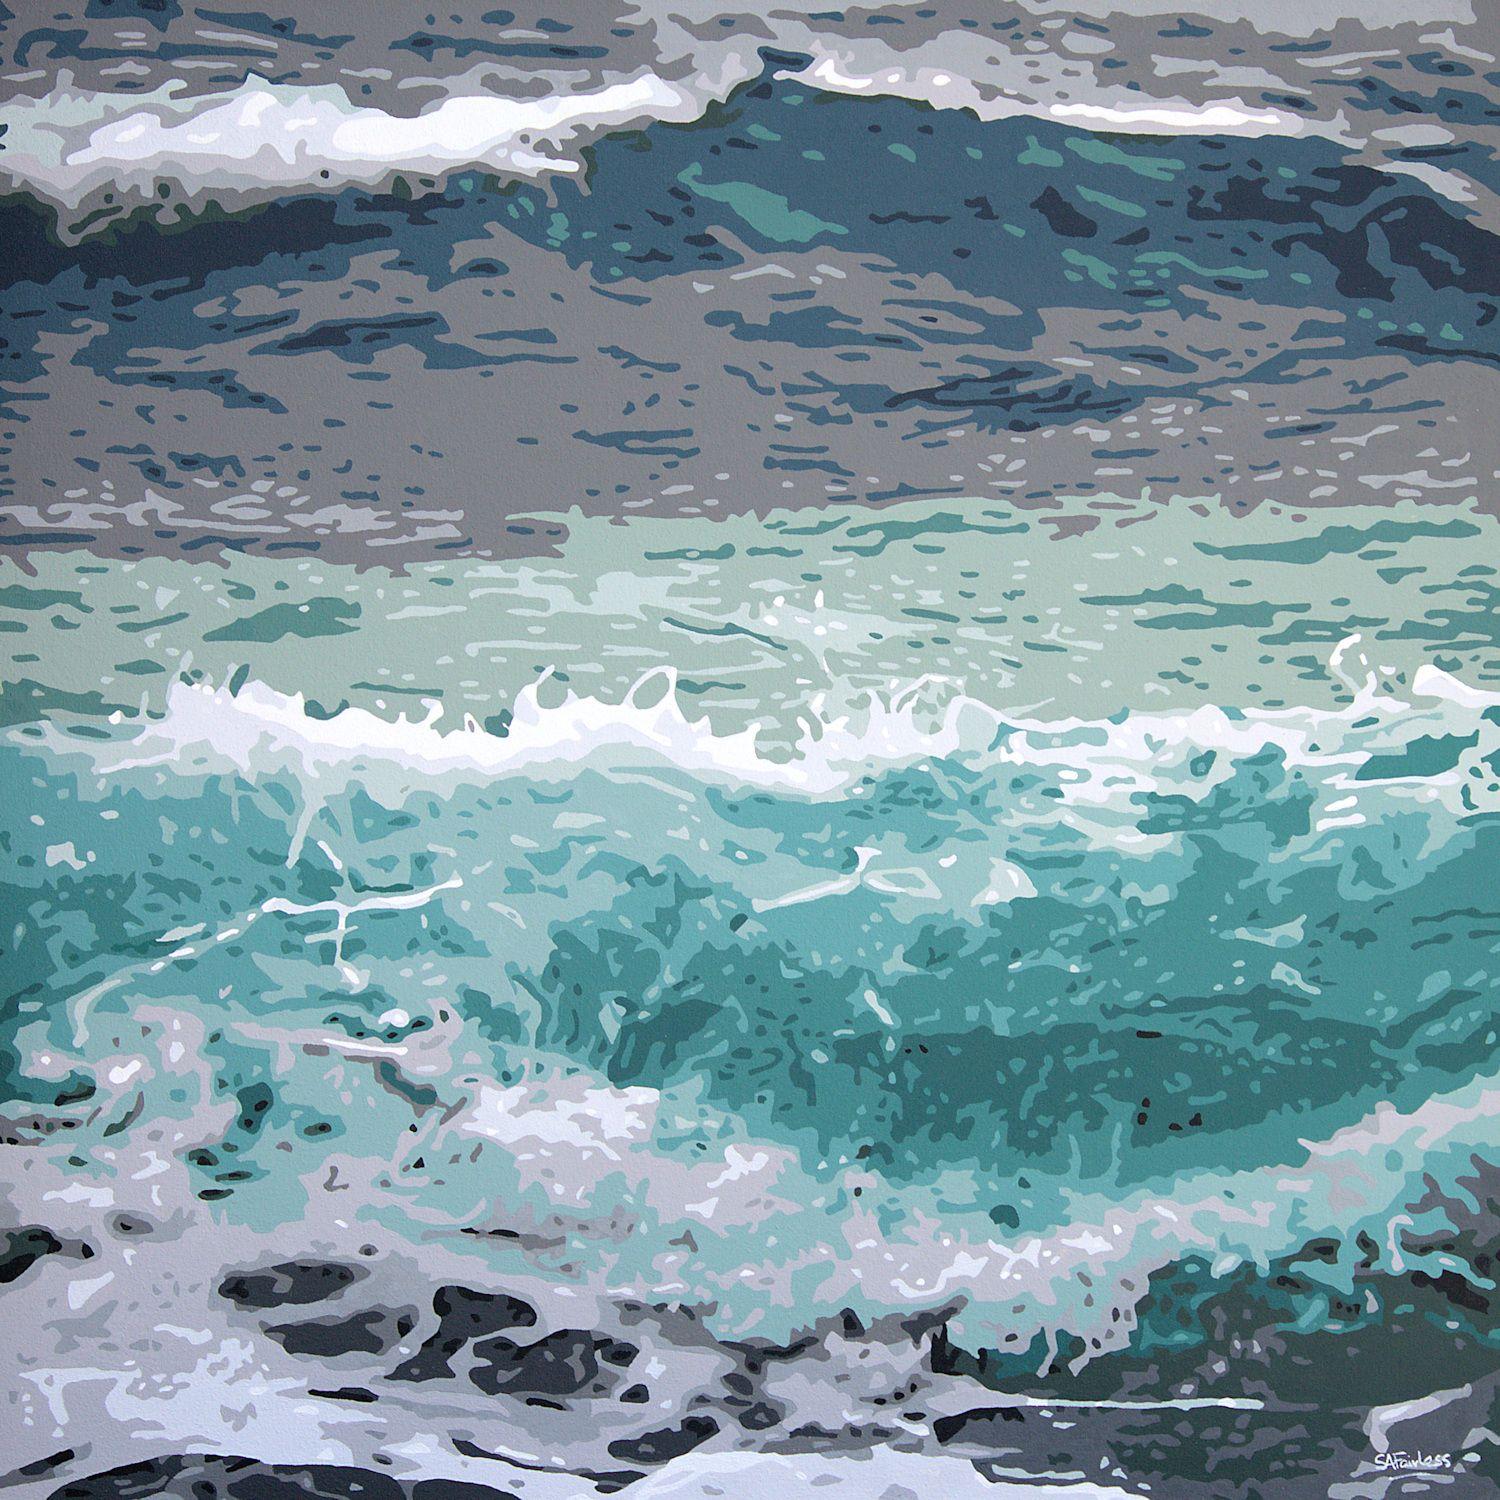 No need to miss the ocean, with this painting you can have all the movement and colour of the ocean in your home. I love the sea, the light, movement and sound, I could stare at this all day and imagine being there. I used one of my photo images